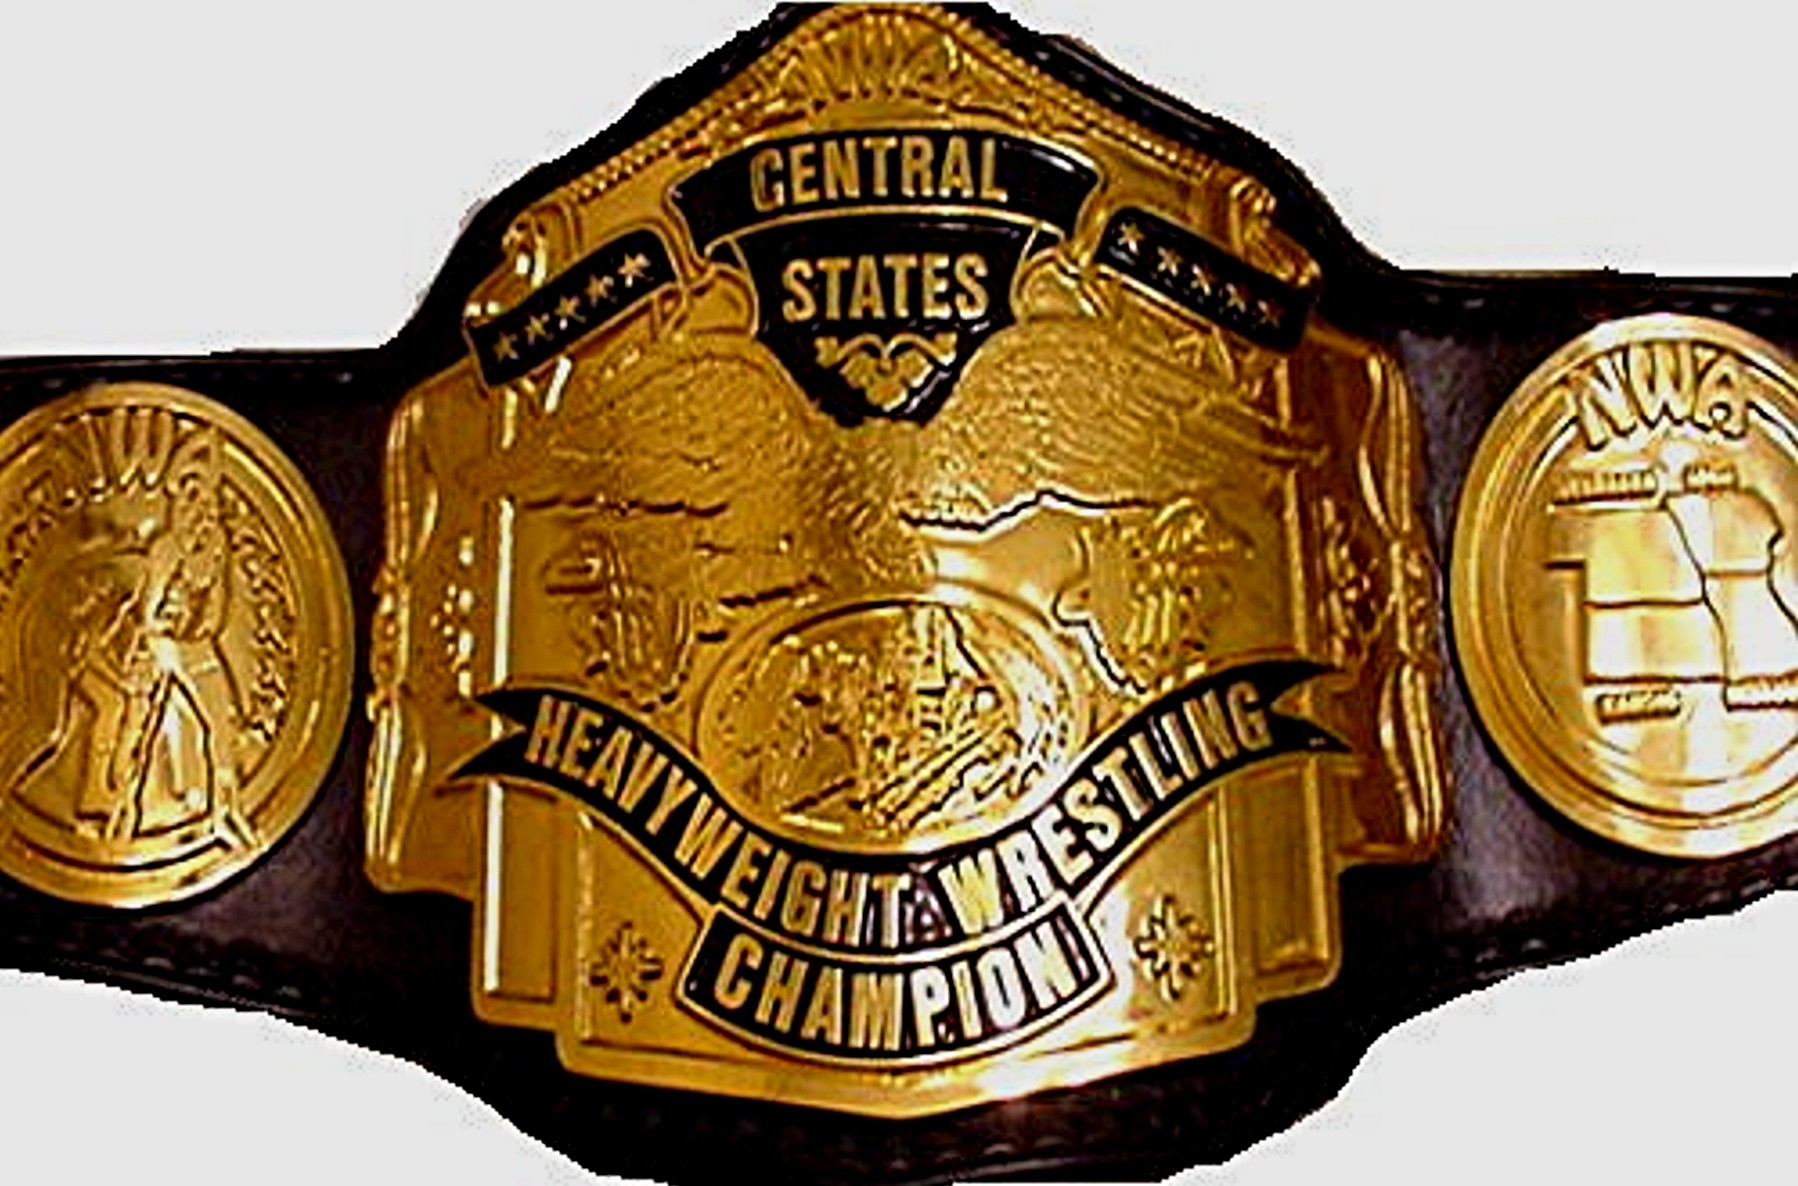 NWA Central States Heavyweight Championship | Pro Wrestling | FANDOM powered by Wikia